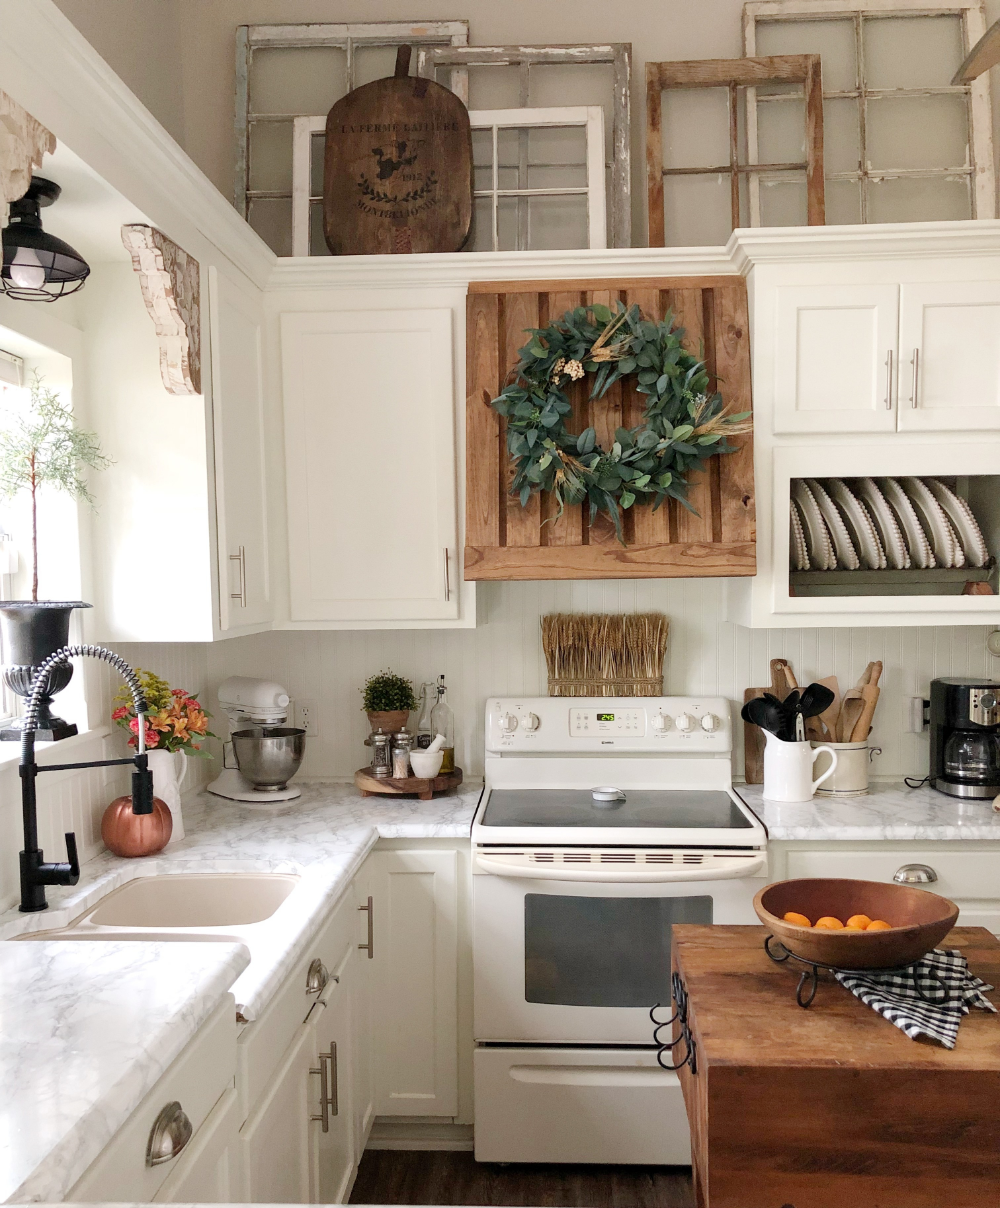 Early Fall Home Tour Inspiration * Hip & Humble Style - Early Fall Home Tour Inspiration * Hip & Humble Style -   15 decorations above kitchen cabinets farmhouse ideas